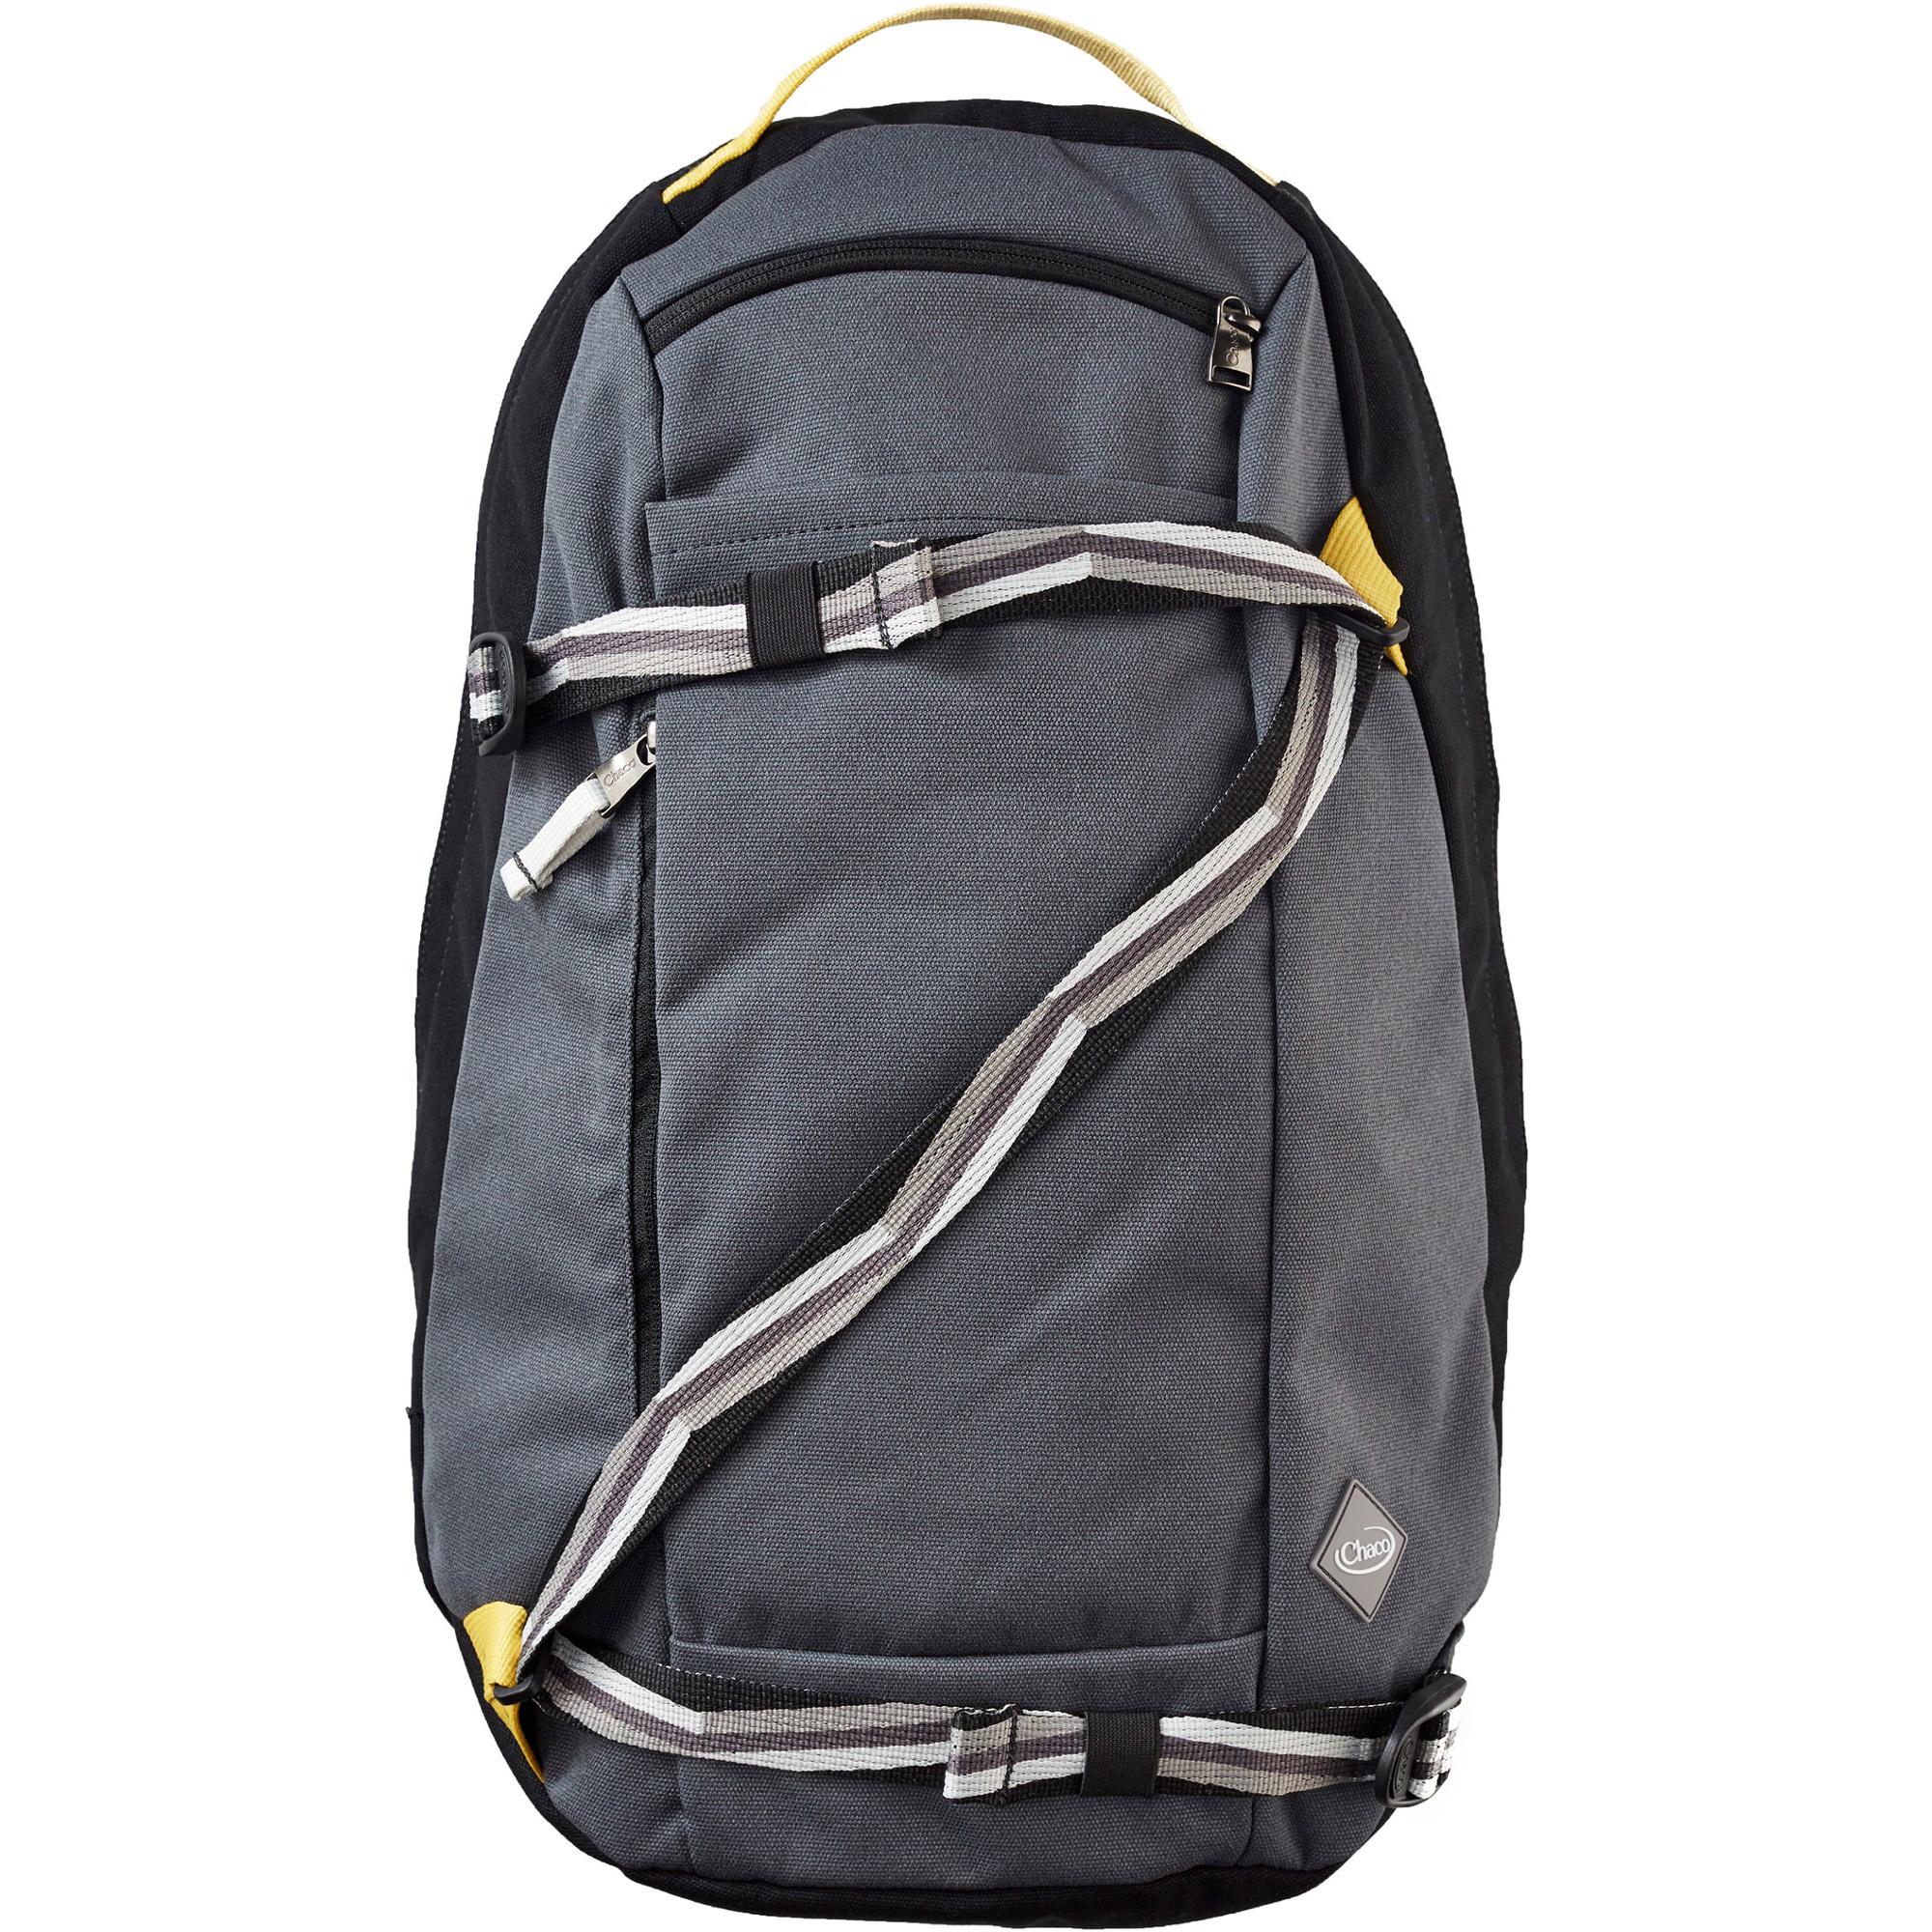 Chaco Radlands 23L Day Pack for $31.73